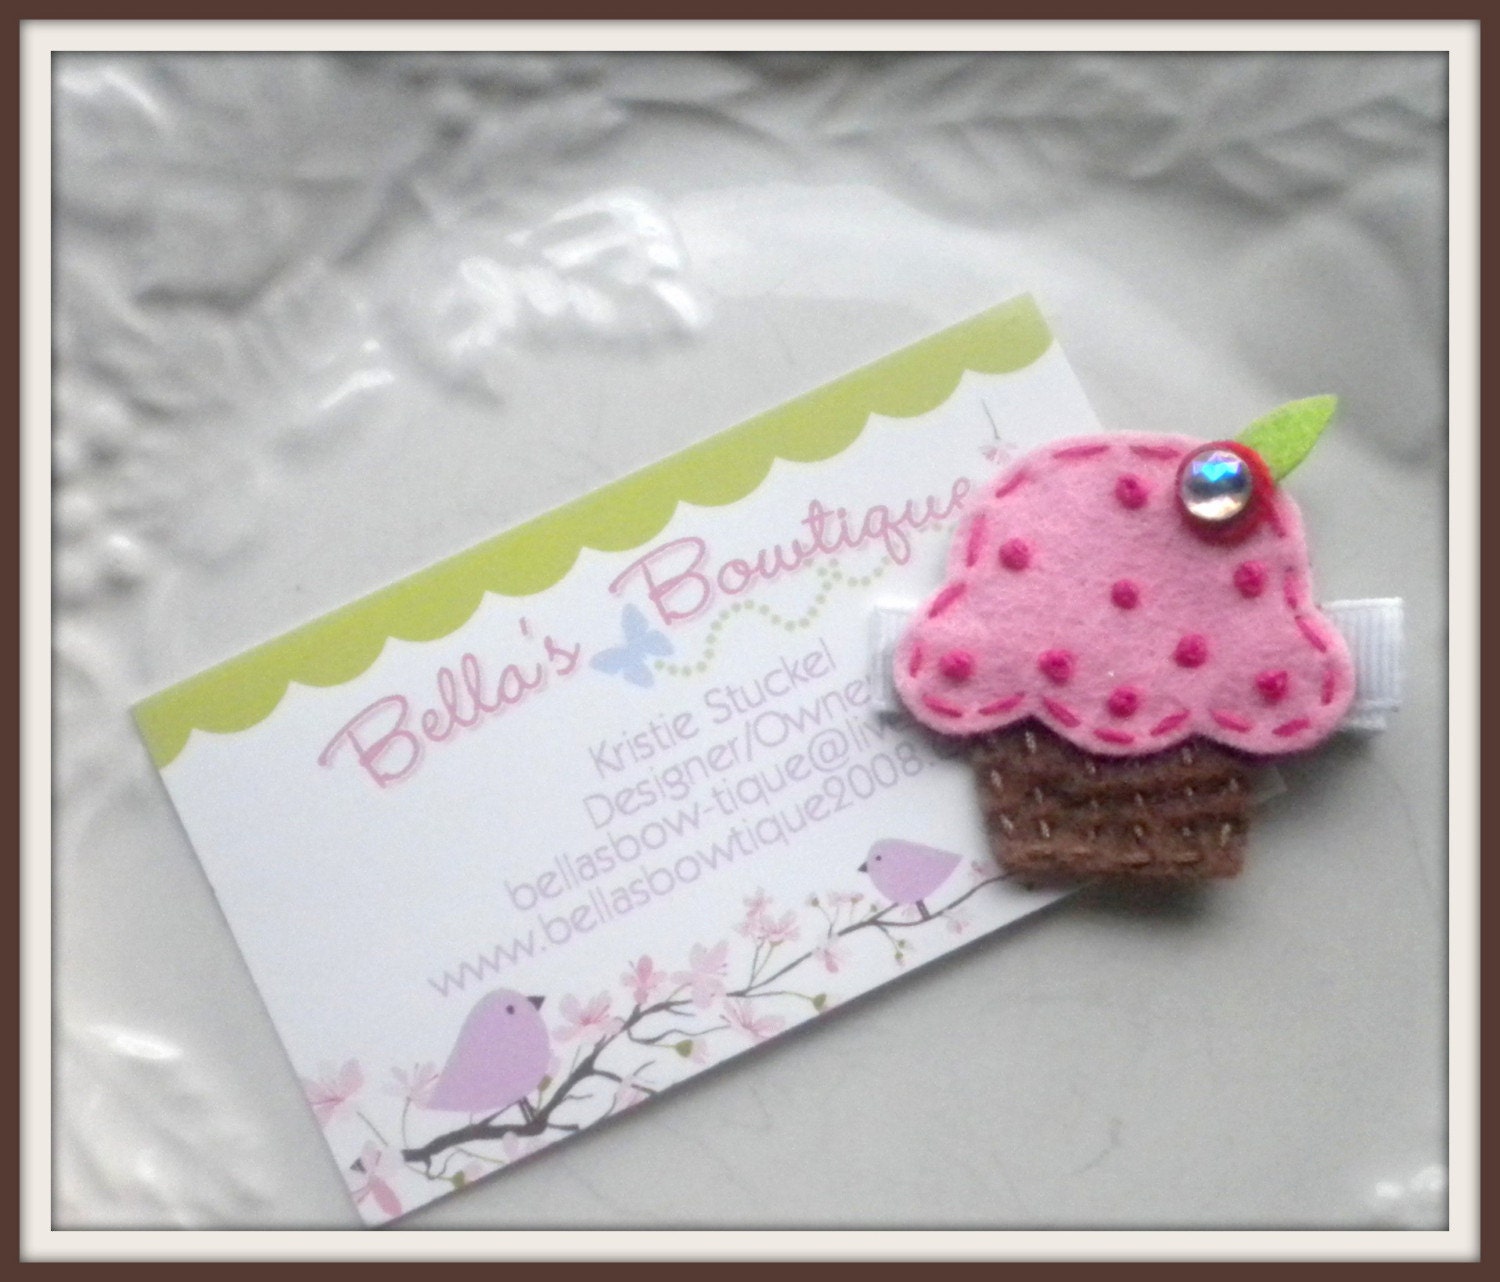 YUMMY CUPCAKE Felt Hair Clip CLIPPIE with BLING CHERRY on Top - No Slip Grip